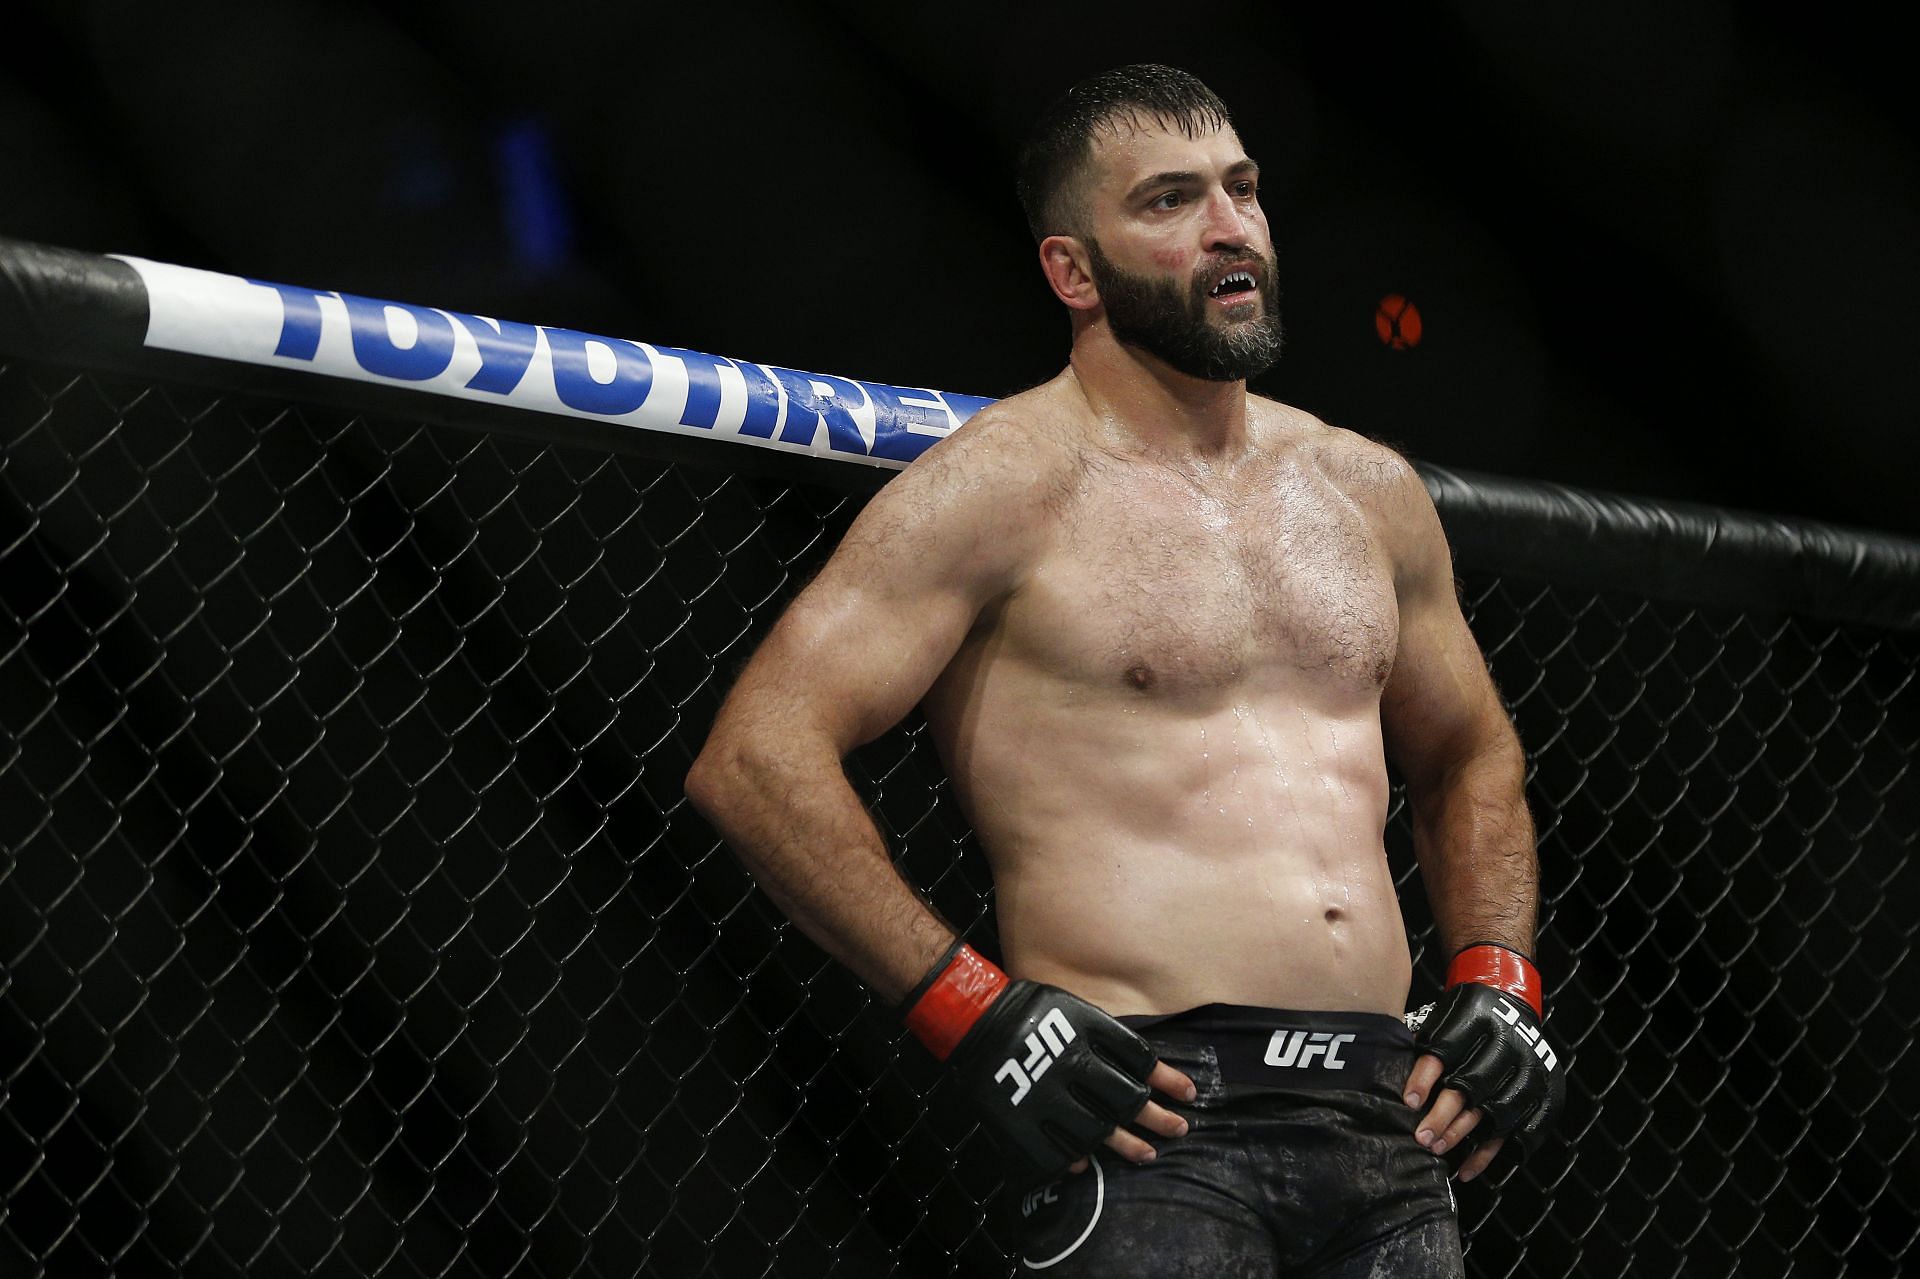 Andrei Arlovski was viewed as unbeatable despite his questionable chin